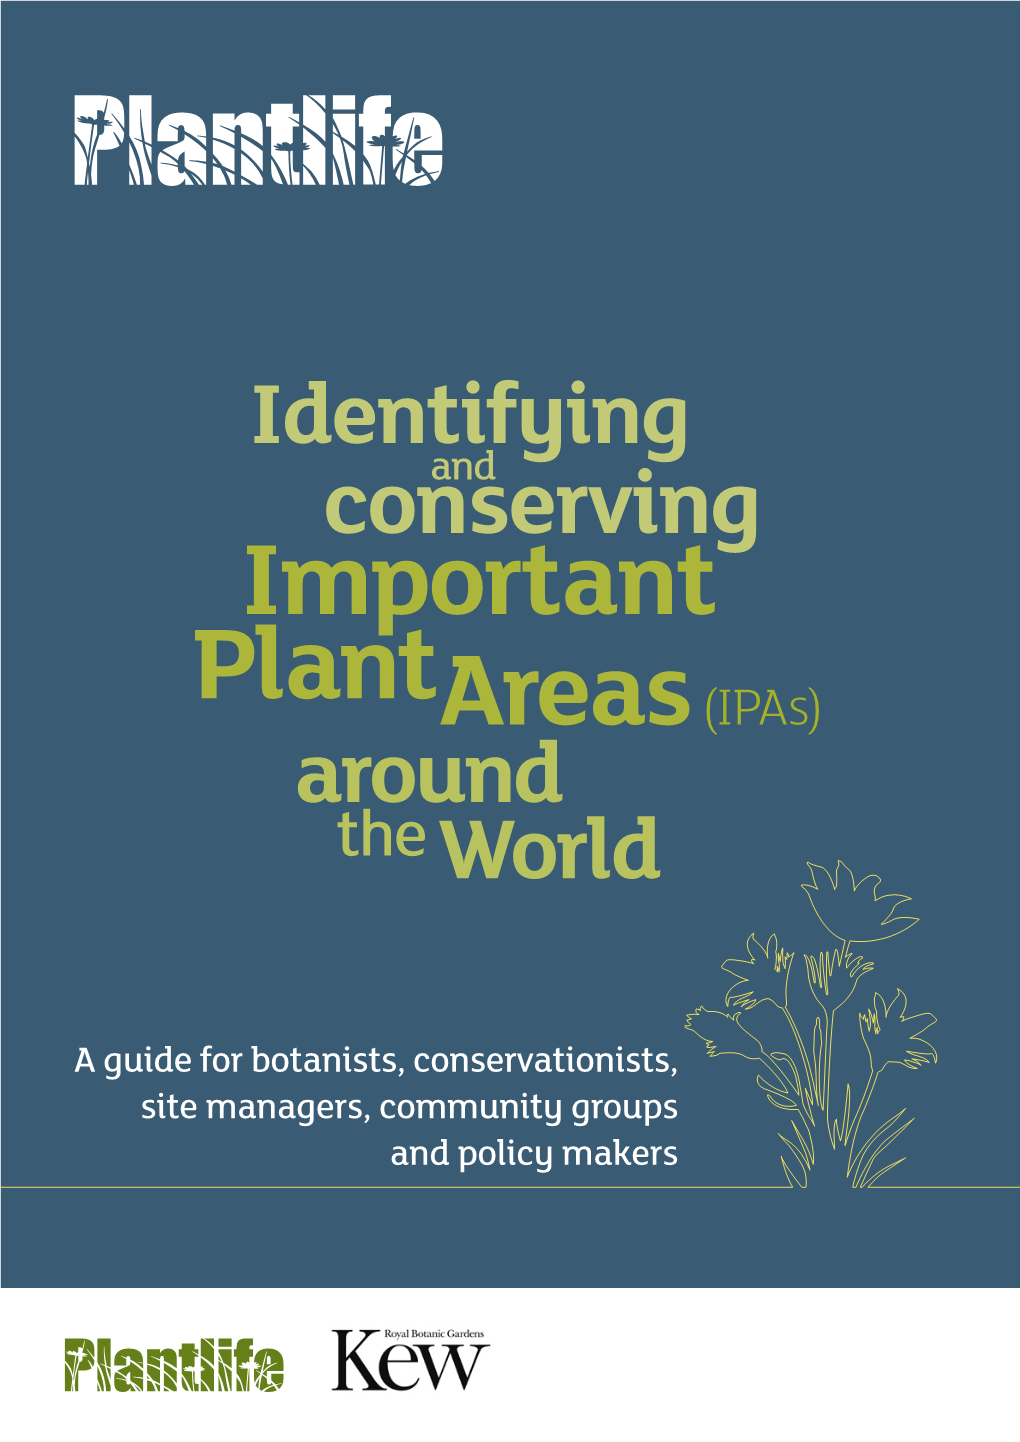 Important Plant Areas (Ipas) Around the World